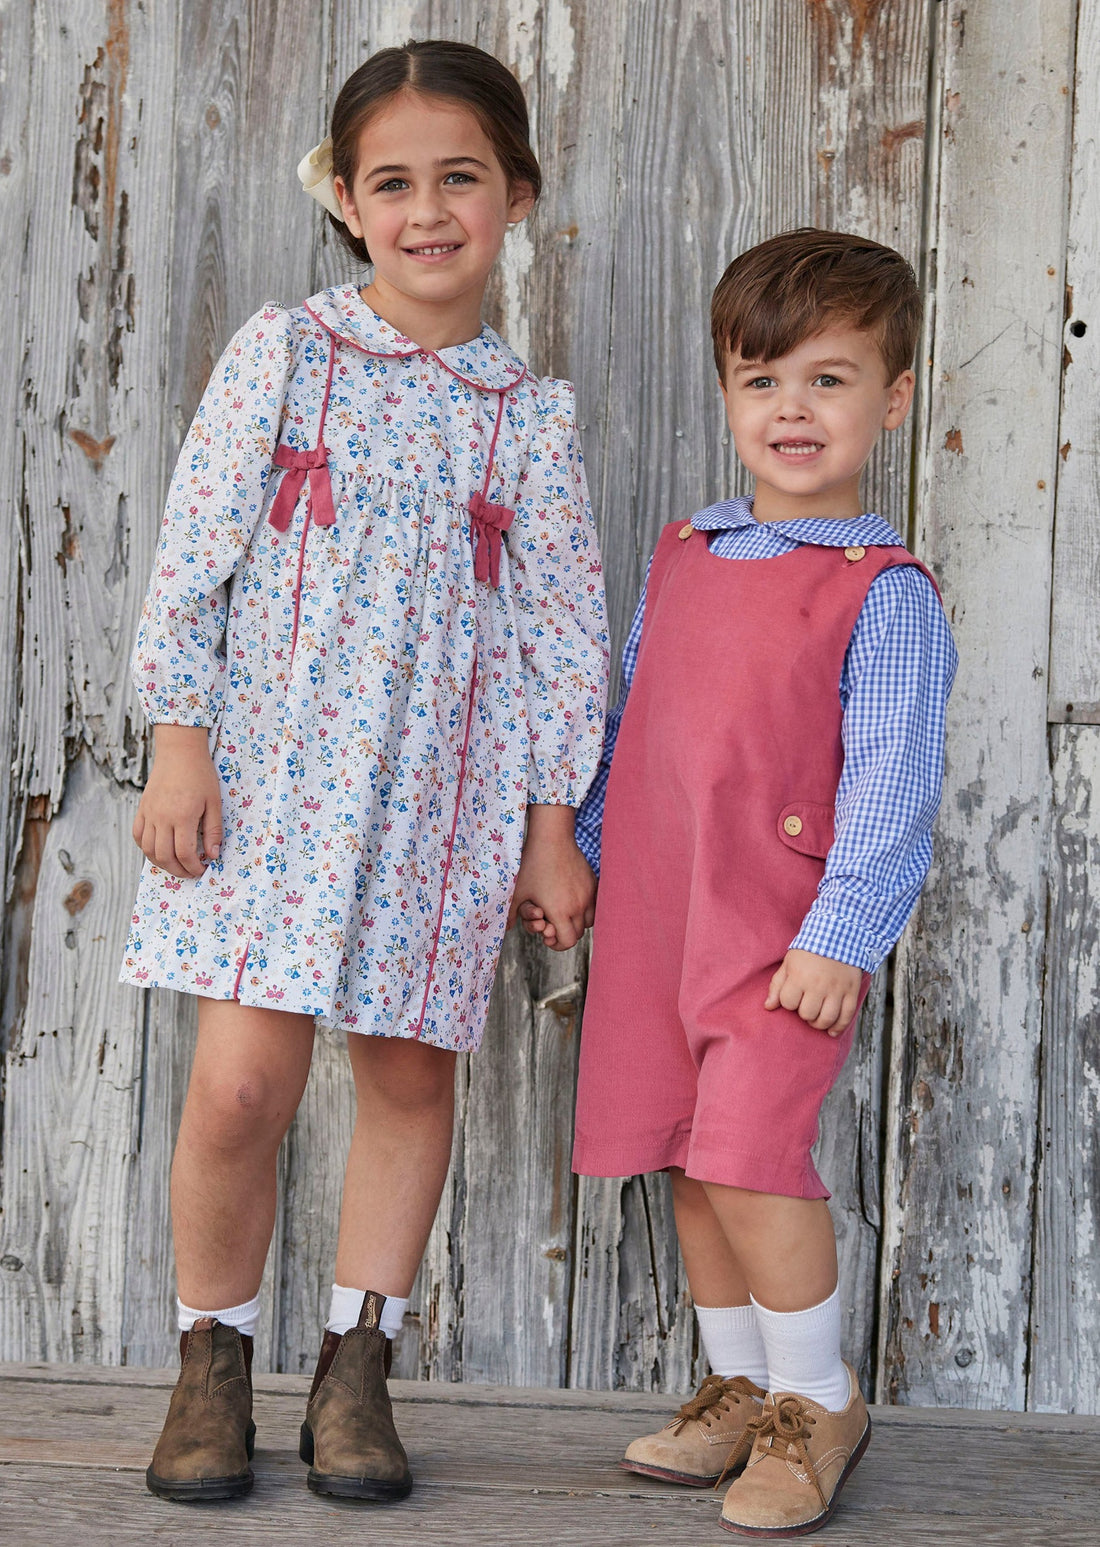 Little english classic toddler boy nantucket red corduroy john john with wooden buttons on tabs and shoulders 